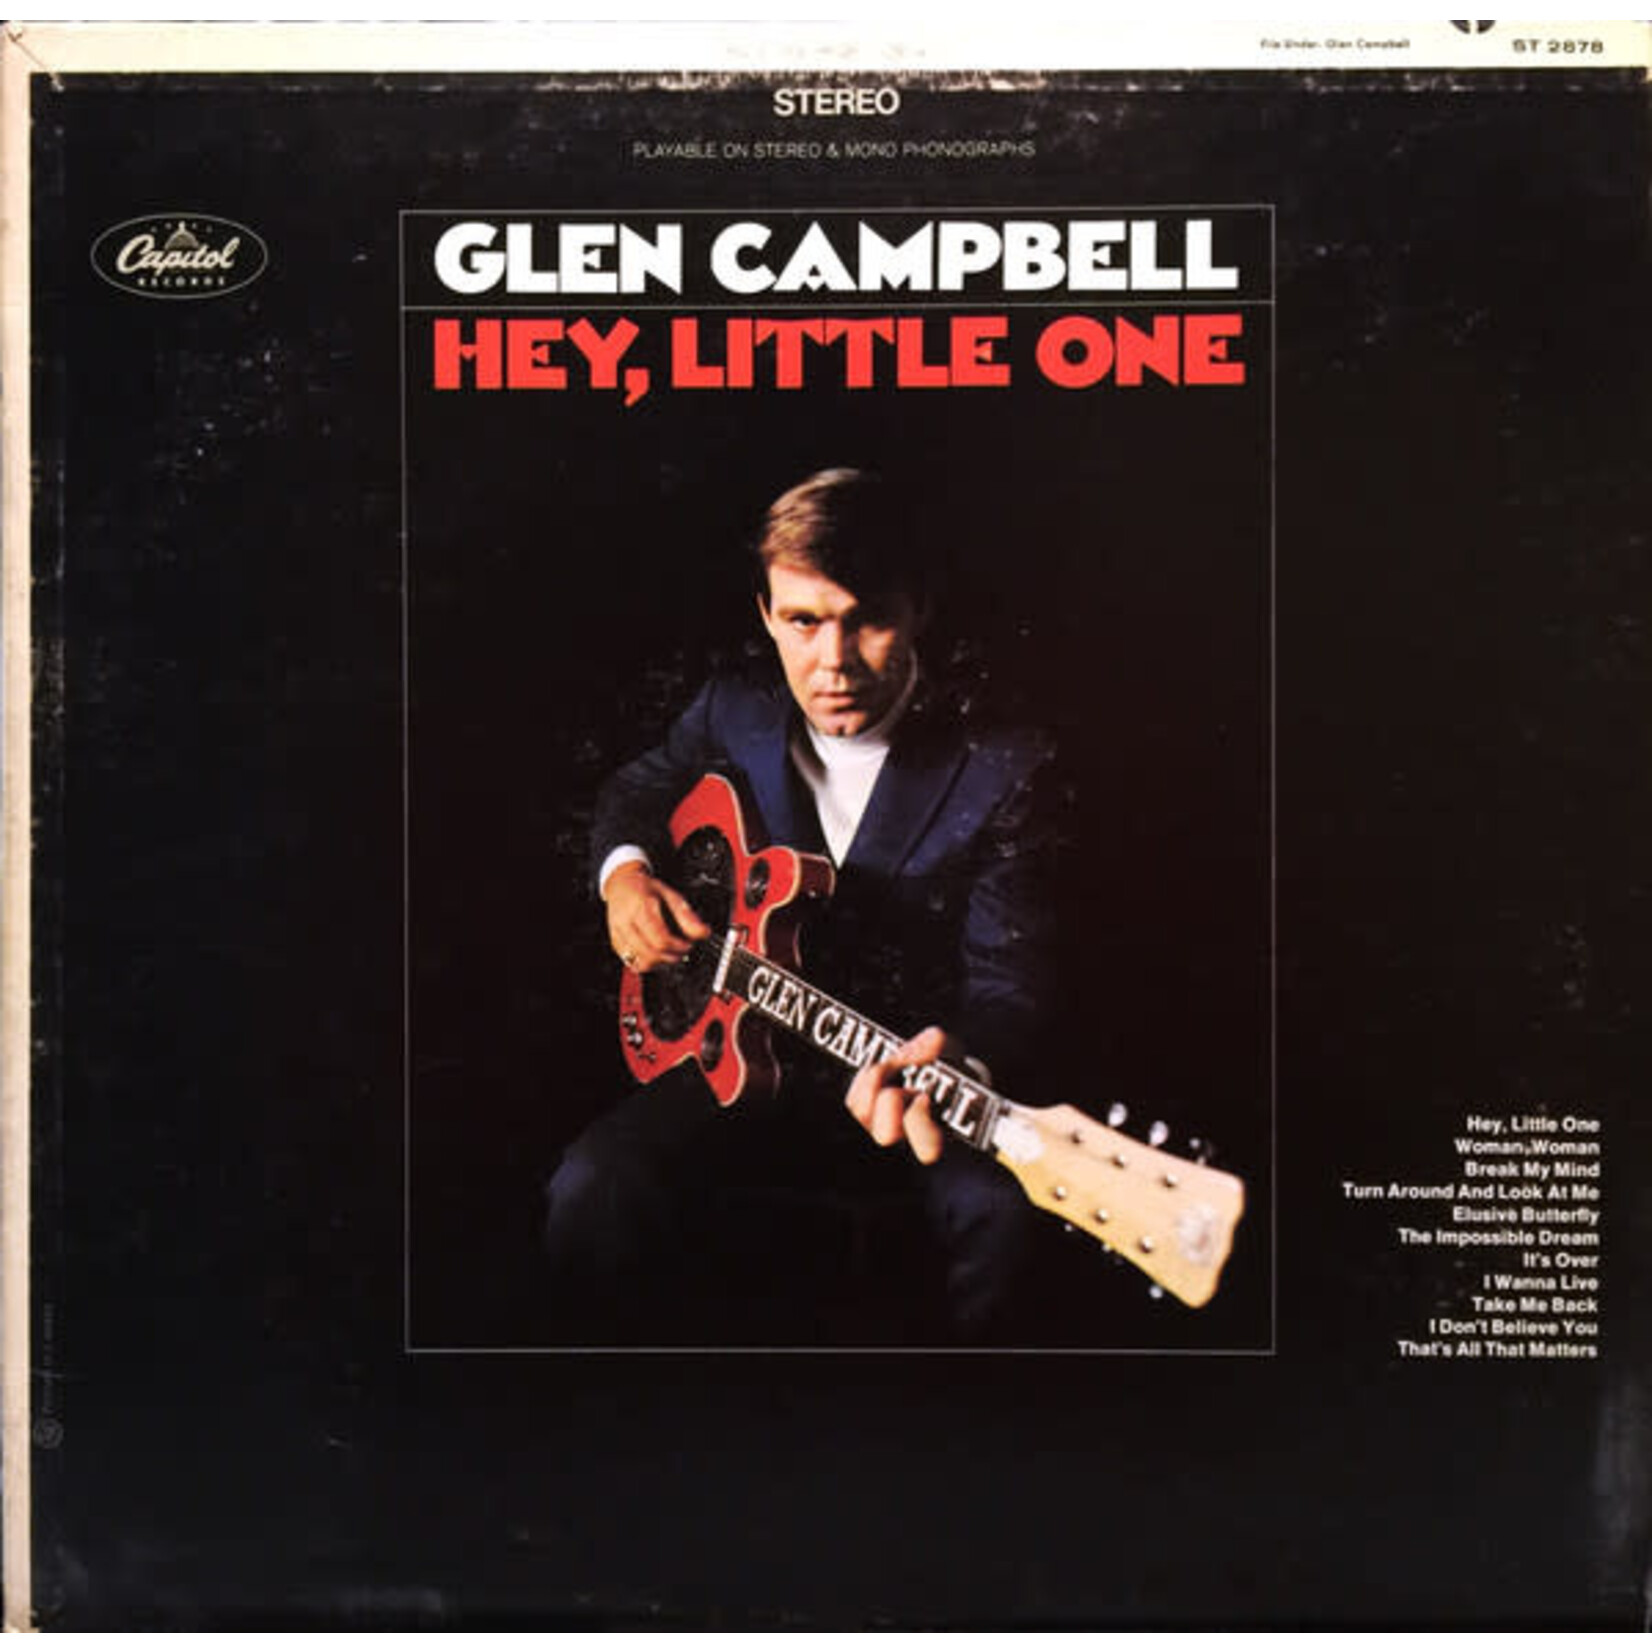 Glen Campbell Glen Campbell – Hey, Little One (VG, 1968, LP, Capitol Records – ST 2878, Canada)